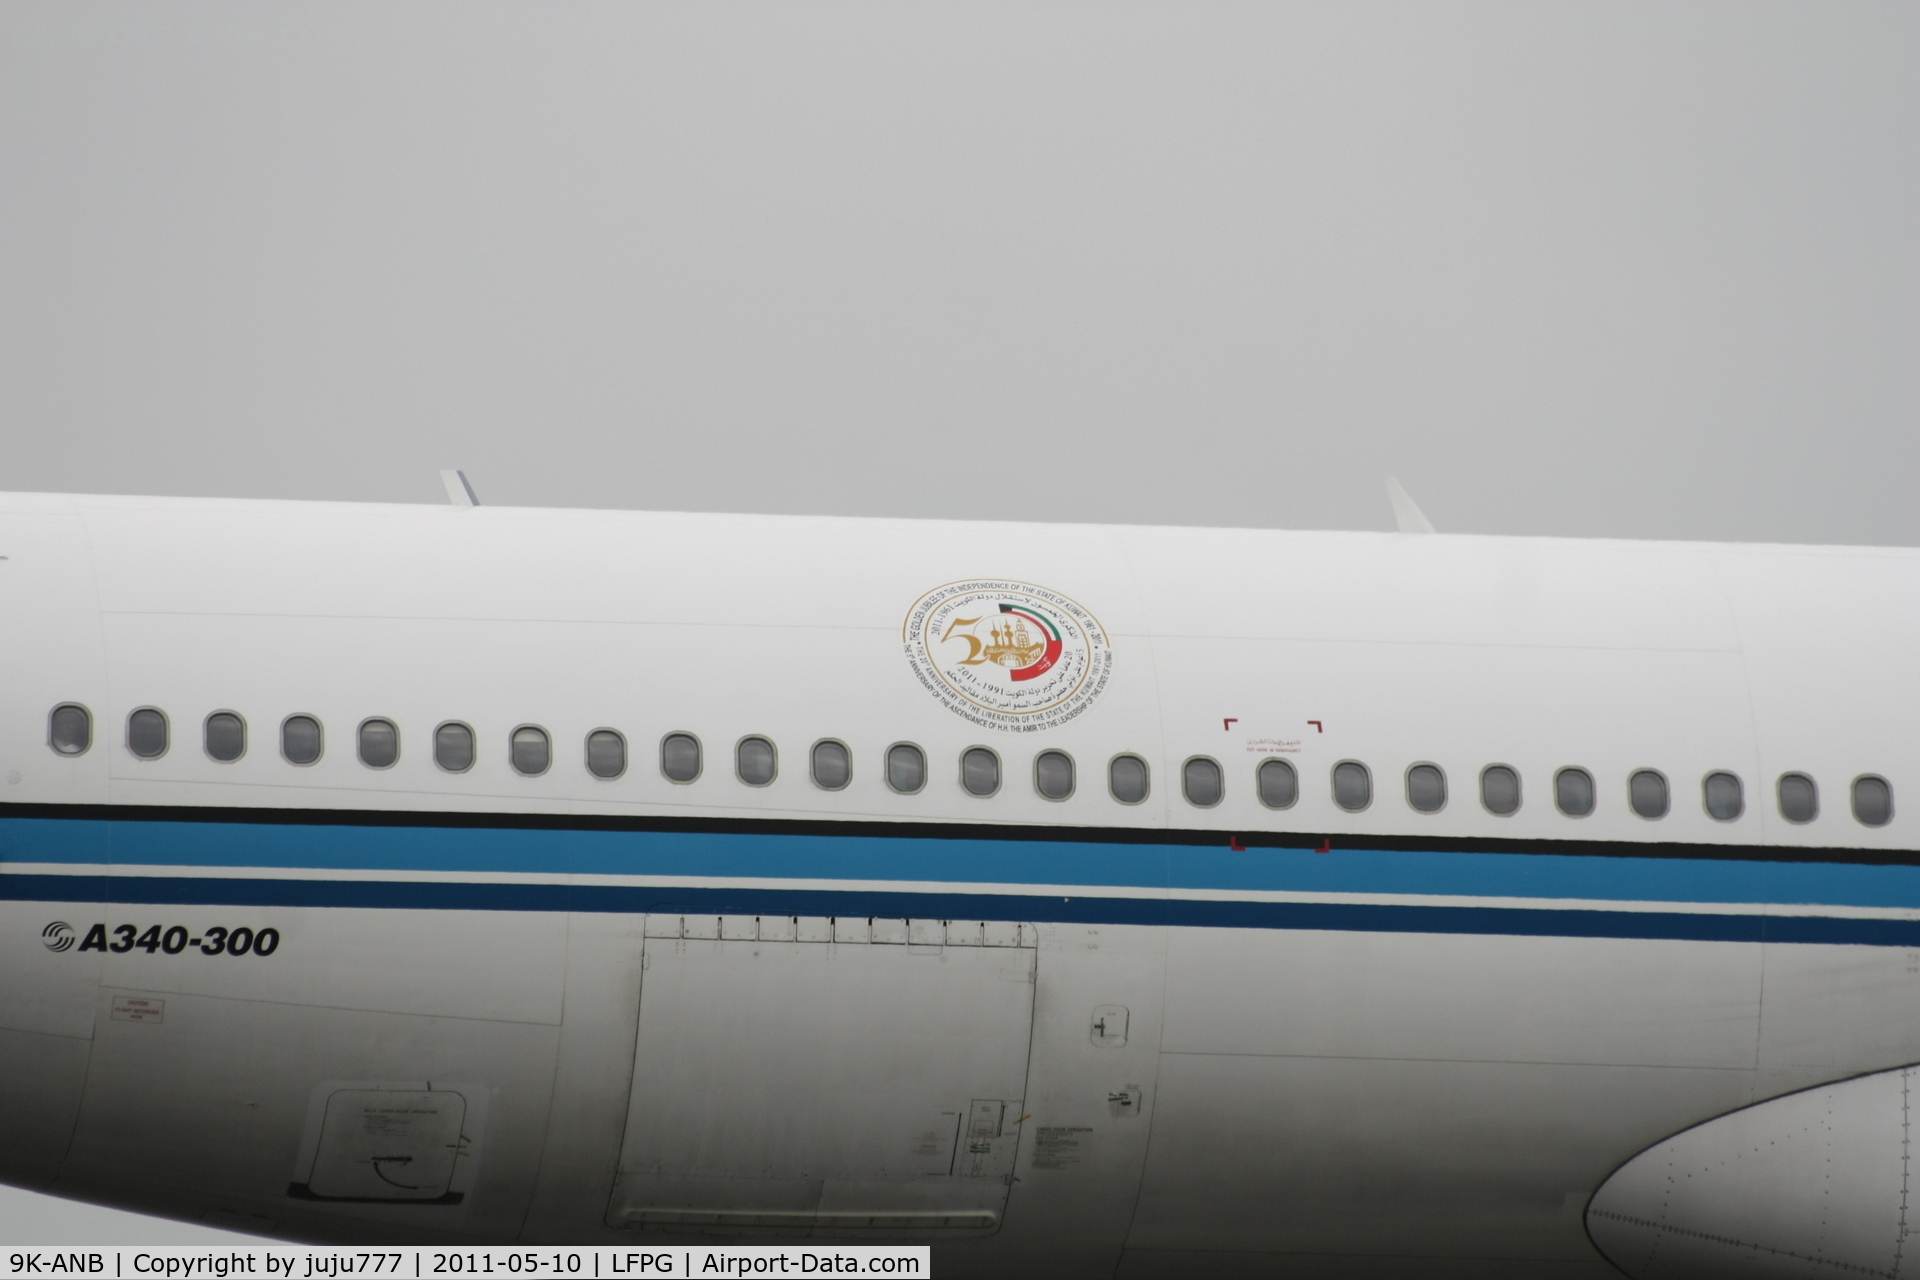 9K-ANB, 1995 Airbus A340-313 C/N 090, sticker for 20th anniversary of the liberation of the state of Kuwait, 5th anniversary of the ascendance of H.H. The amir to the Leadership of the state of Kuwait